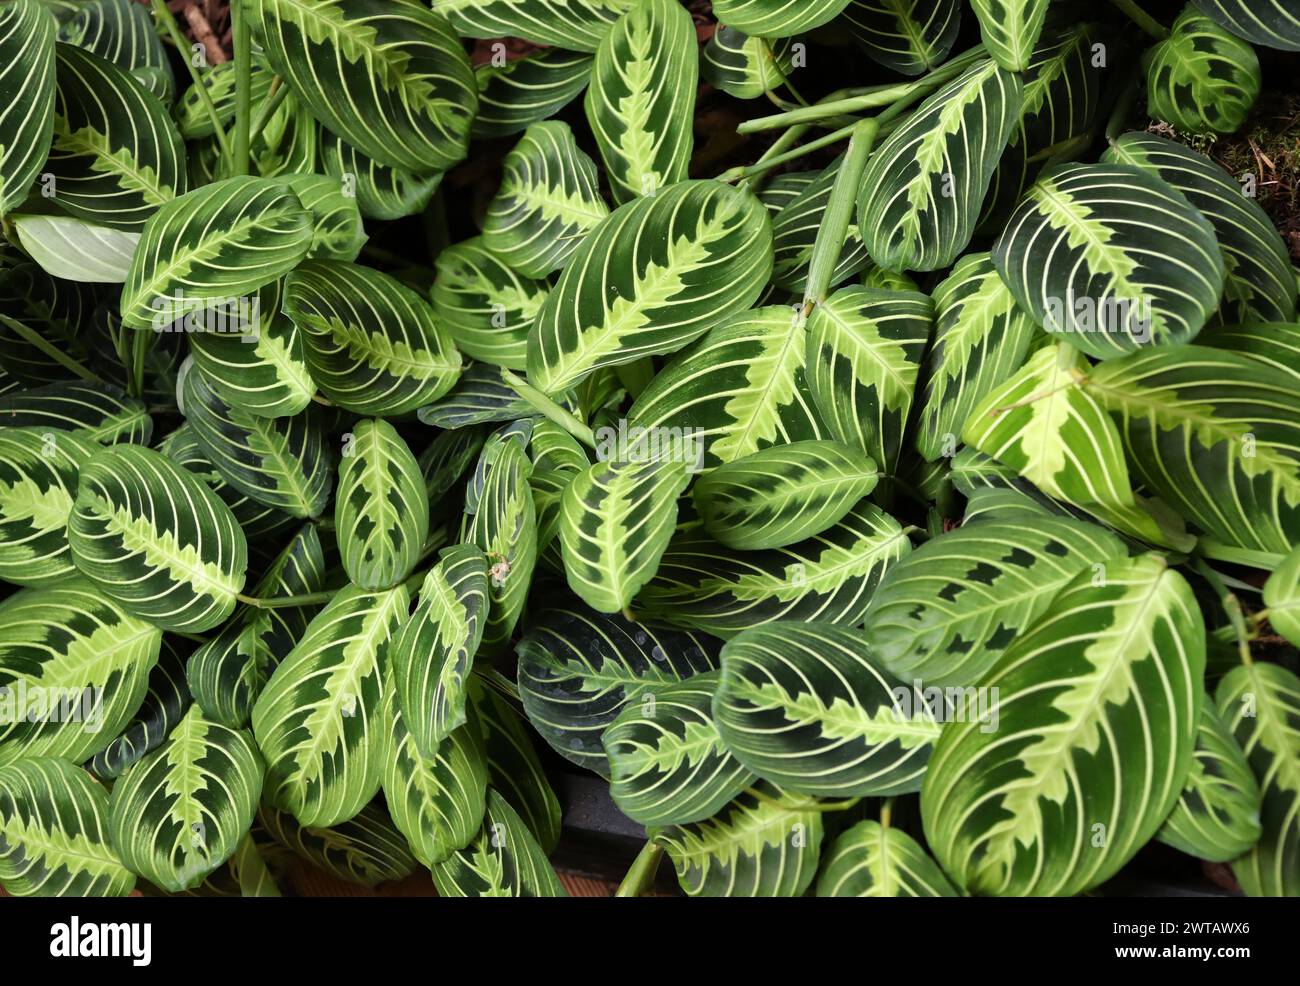 Prayer Plant, Maranta 'Lemon Lime', Marantaceae,.native to tropical Central and South America and the West Indies. Stock Photo